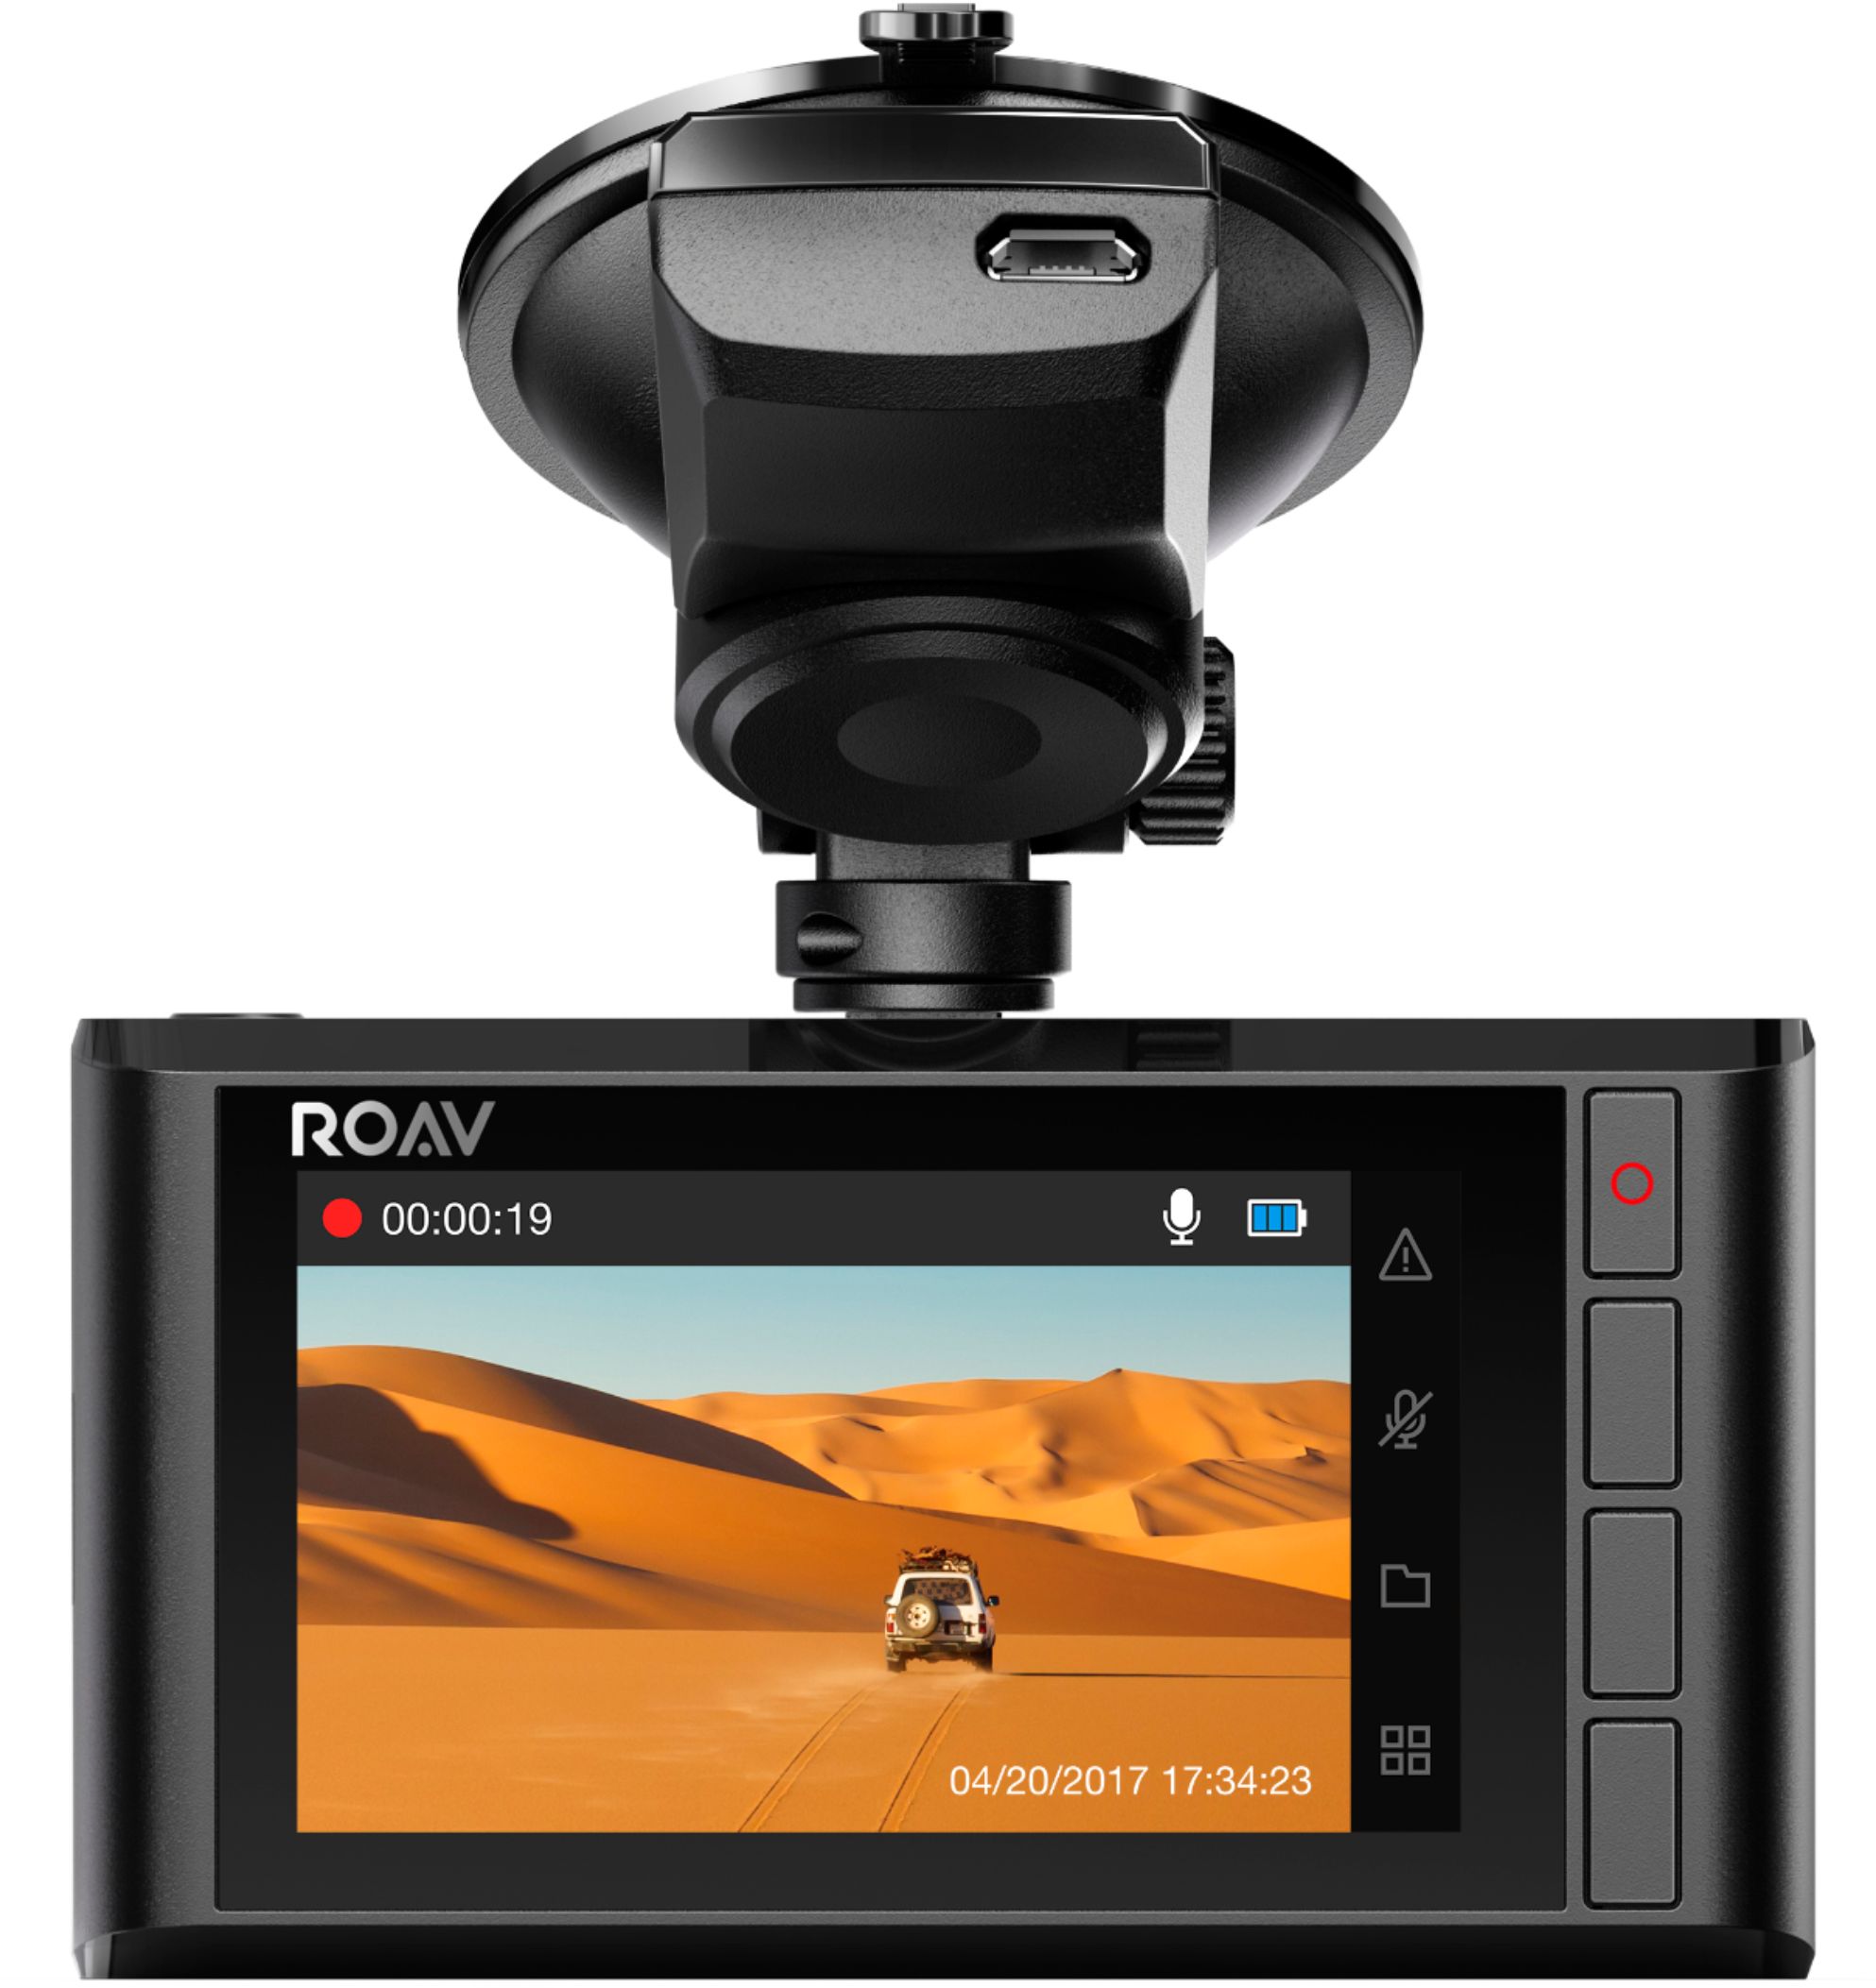 Grab Anker's Roav C2 Pro dash cam while it's on sale for $100 at